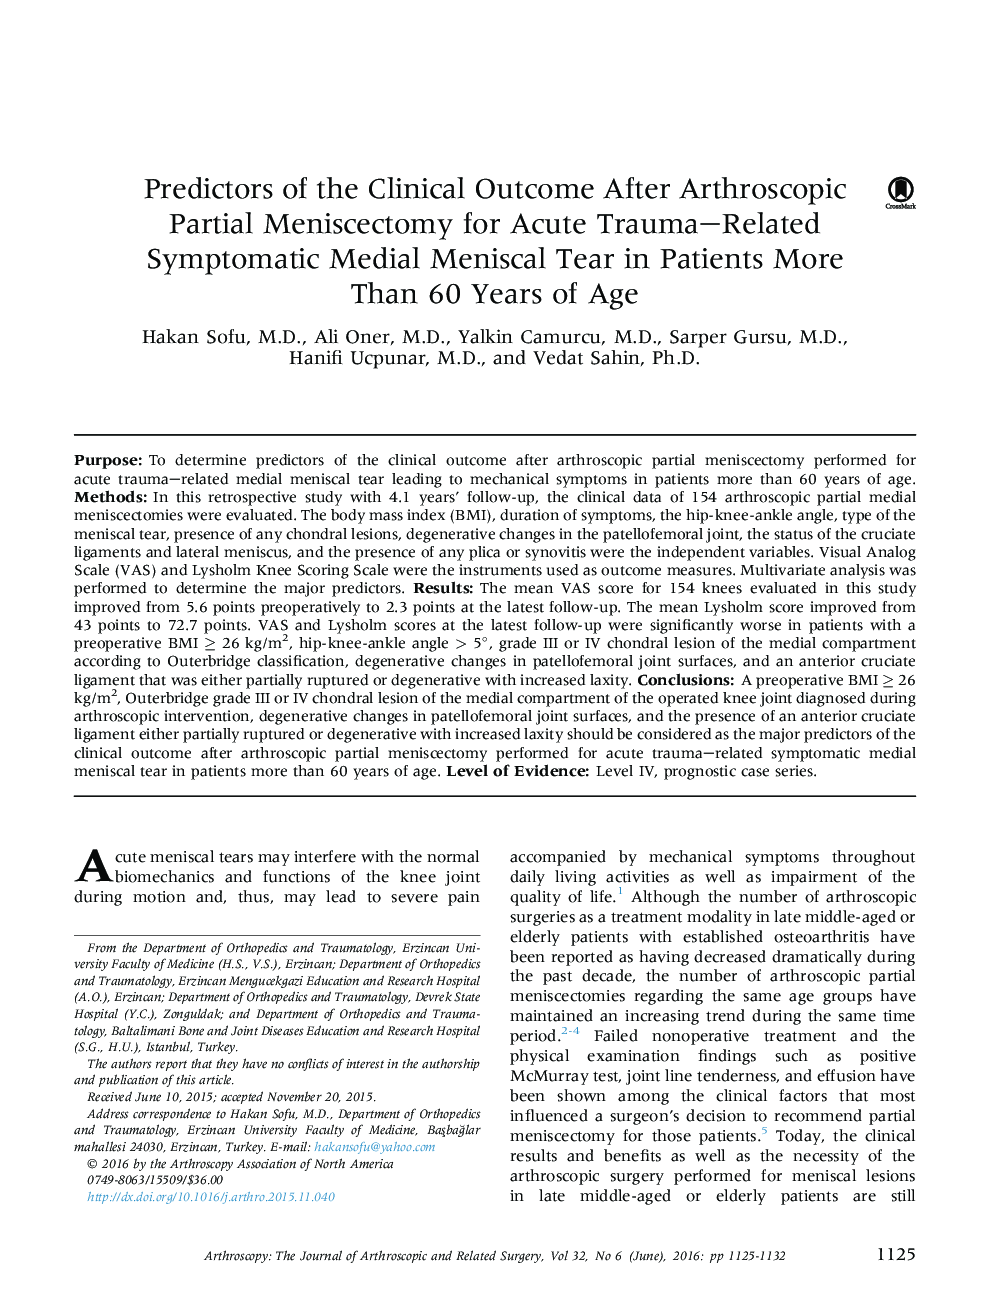 Predictors of the Clinical Outcome After Arthroscopic Partial Meniscectomy for Acute Trauma–Related Symptomatic Medial Meniscal Tear in Patients More Than 60 Years of Age 